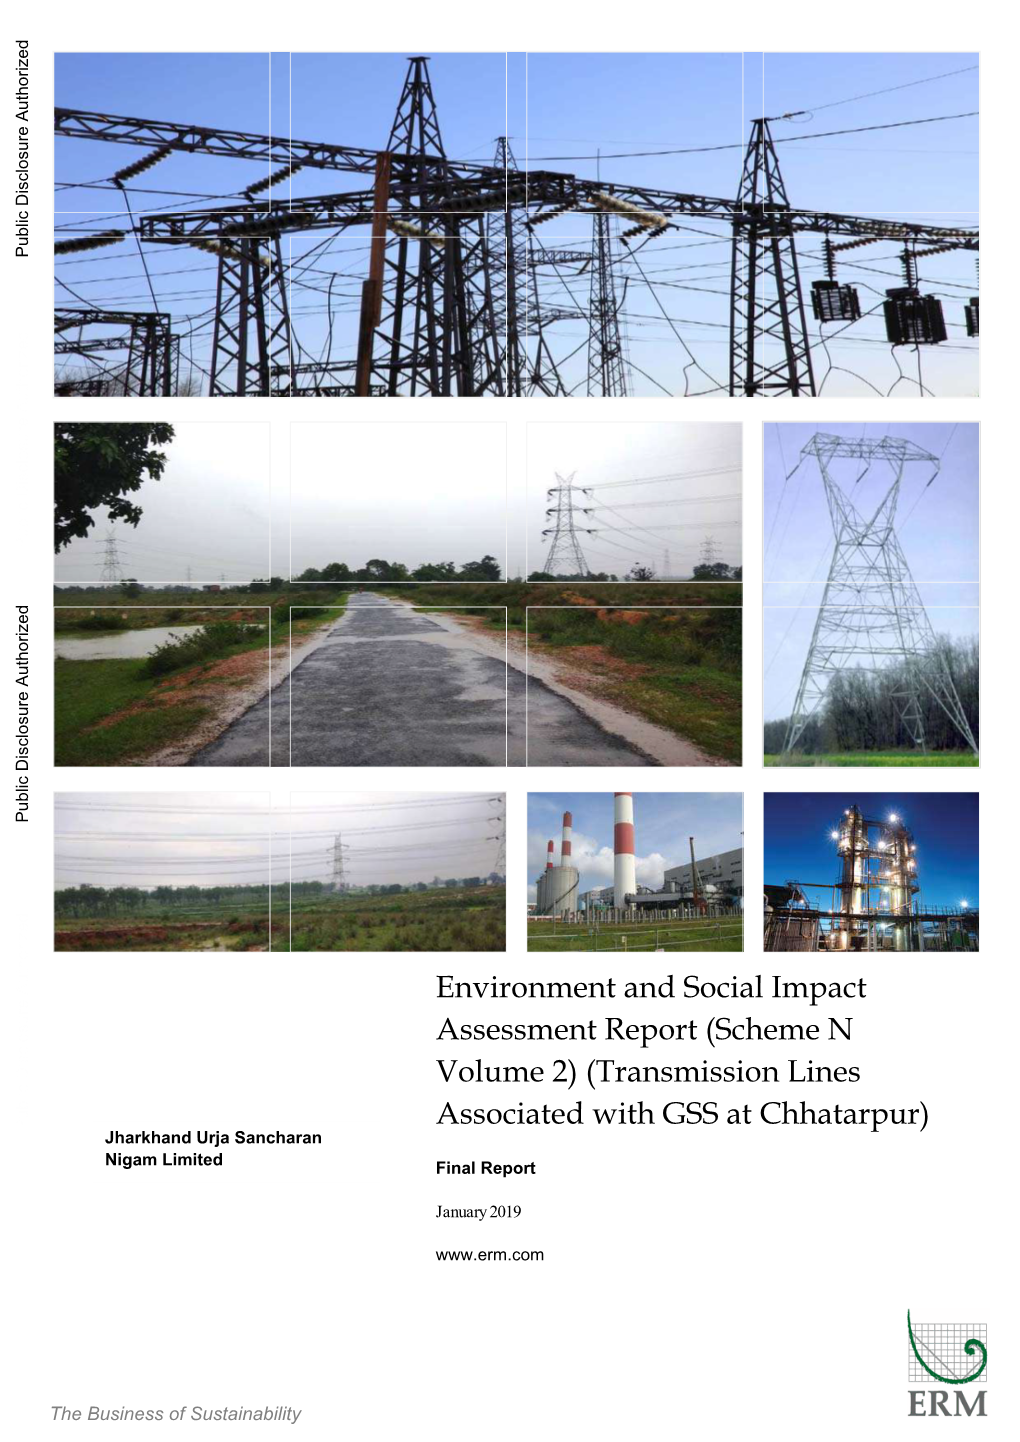 Scheme N Volume 2) (Transmission Lines Associated with GSS at Chhatarpur